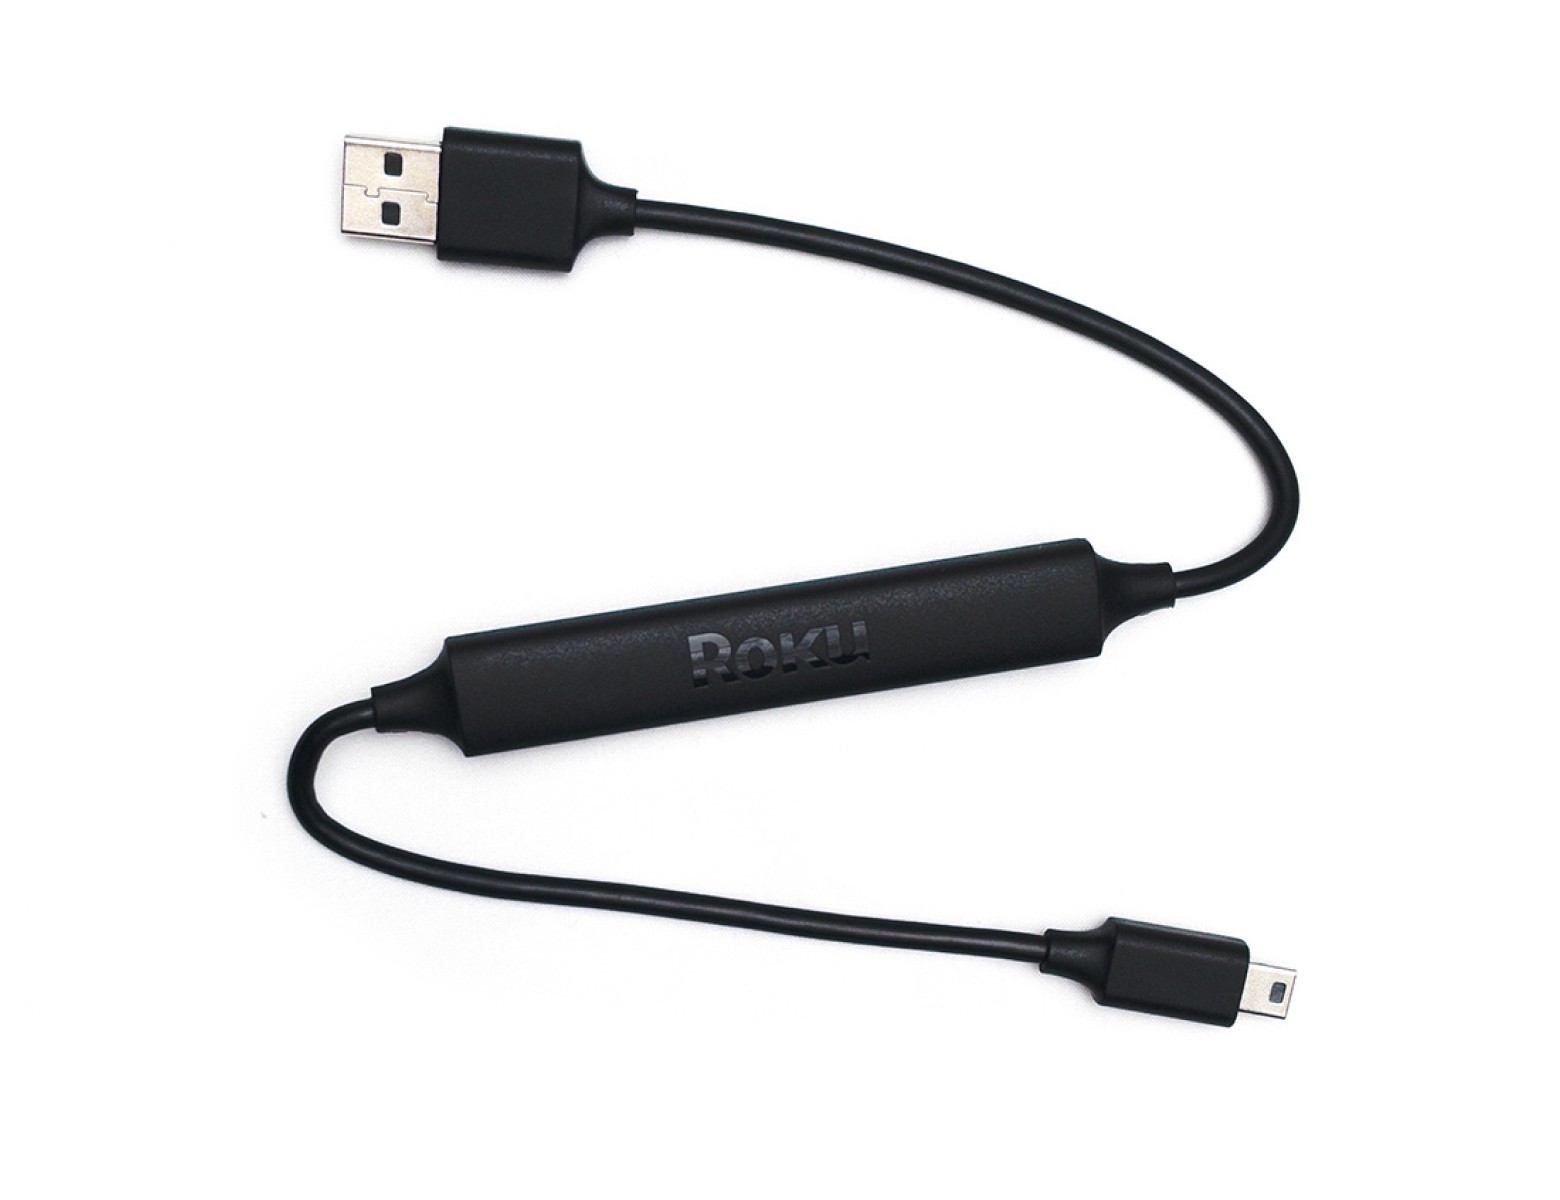 Image of USB power cable with long-range wireless receiver.